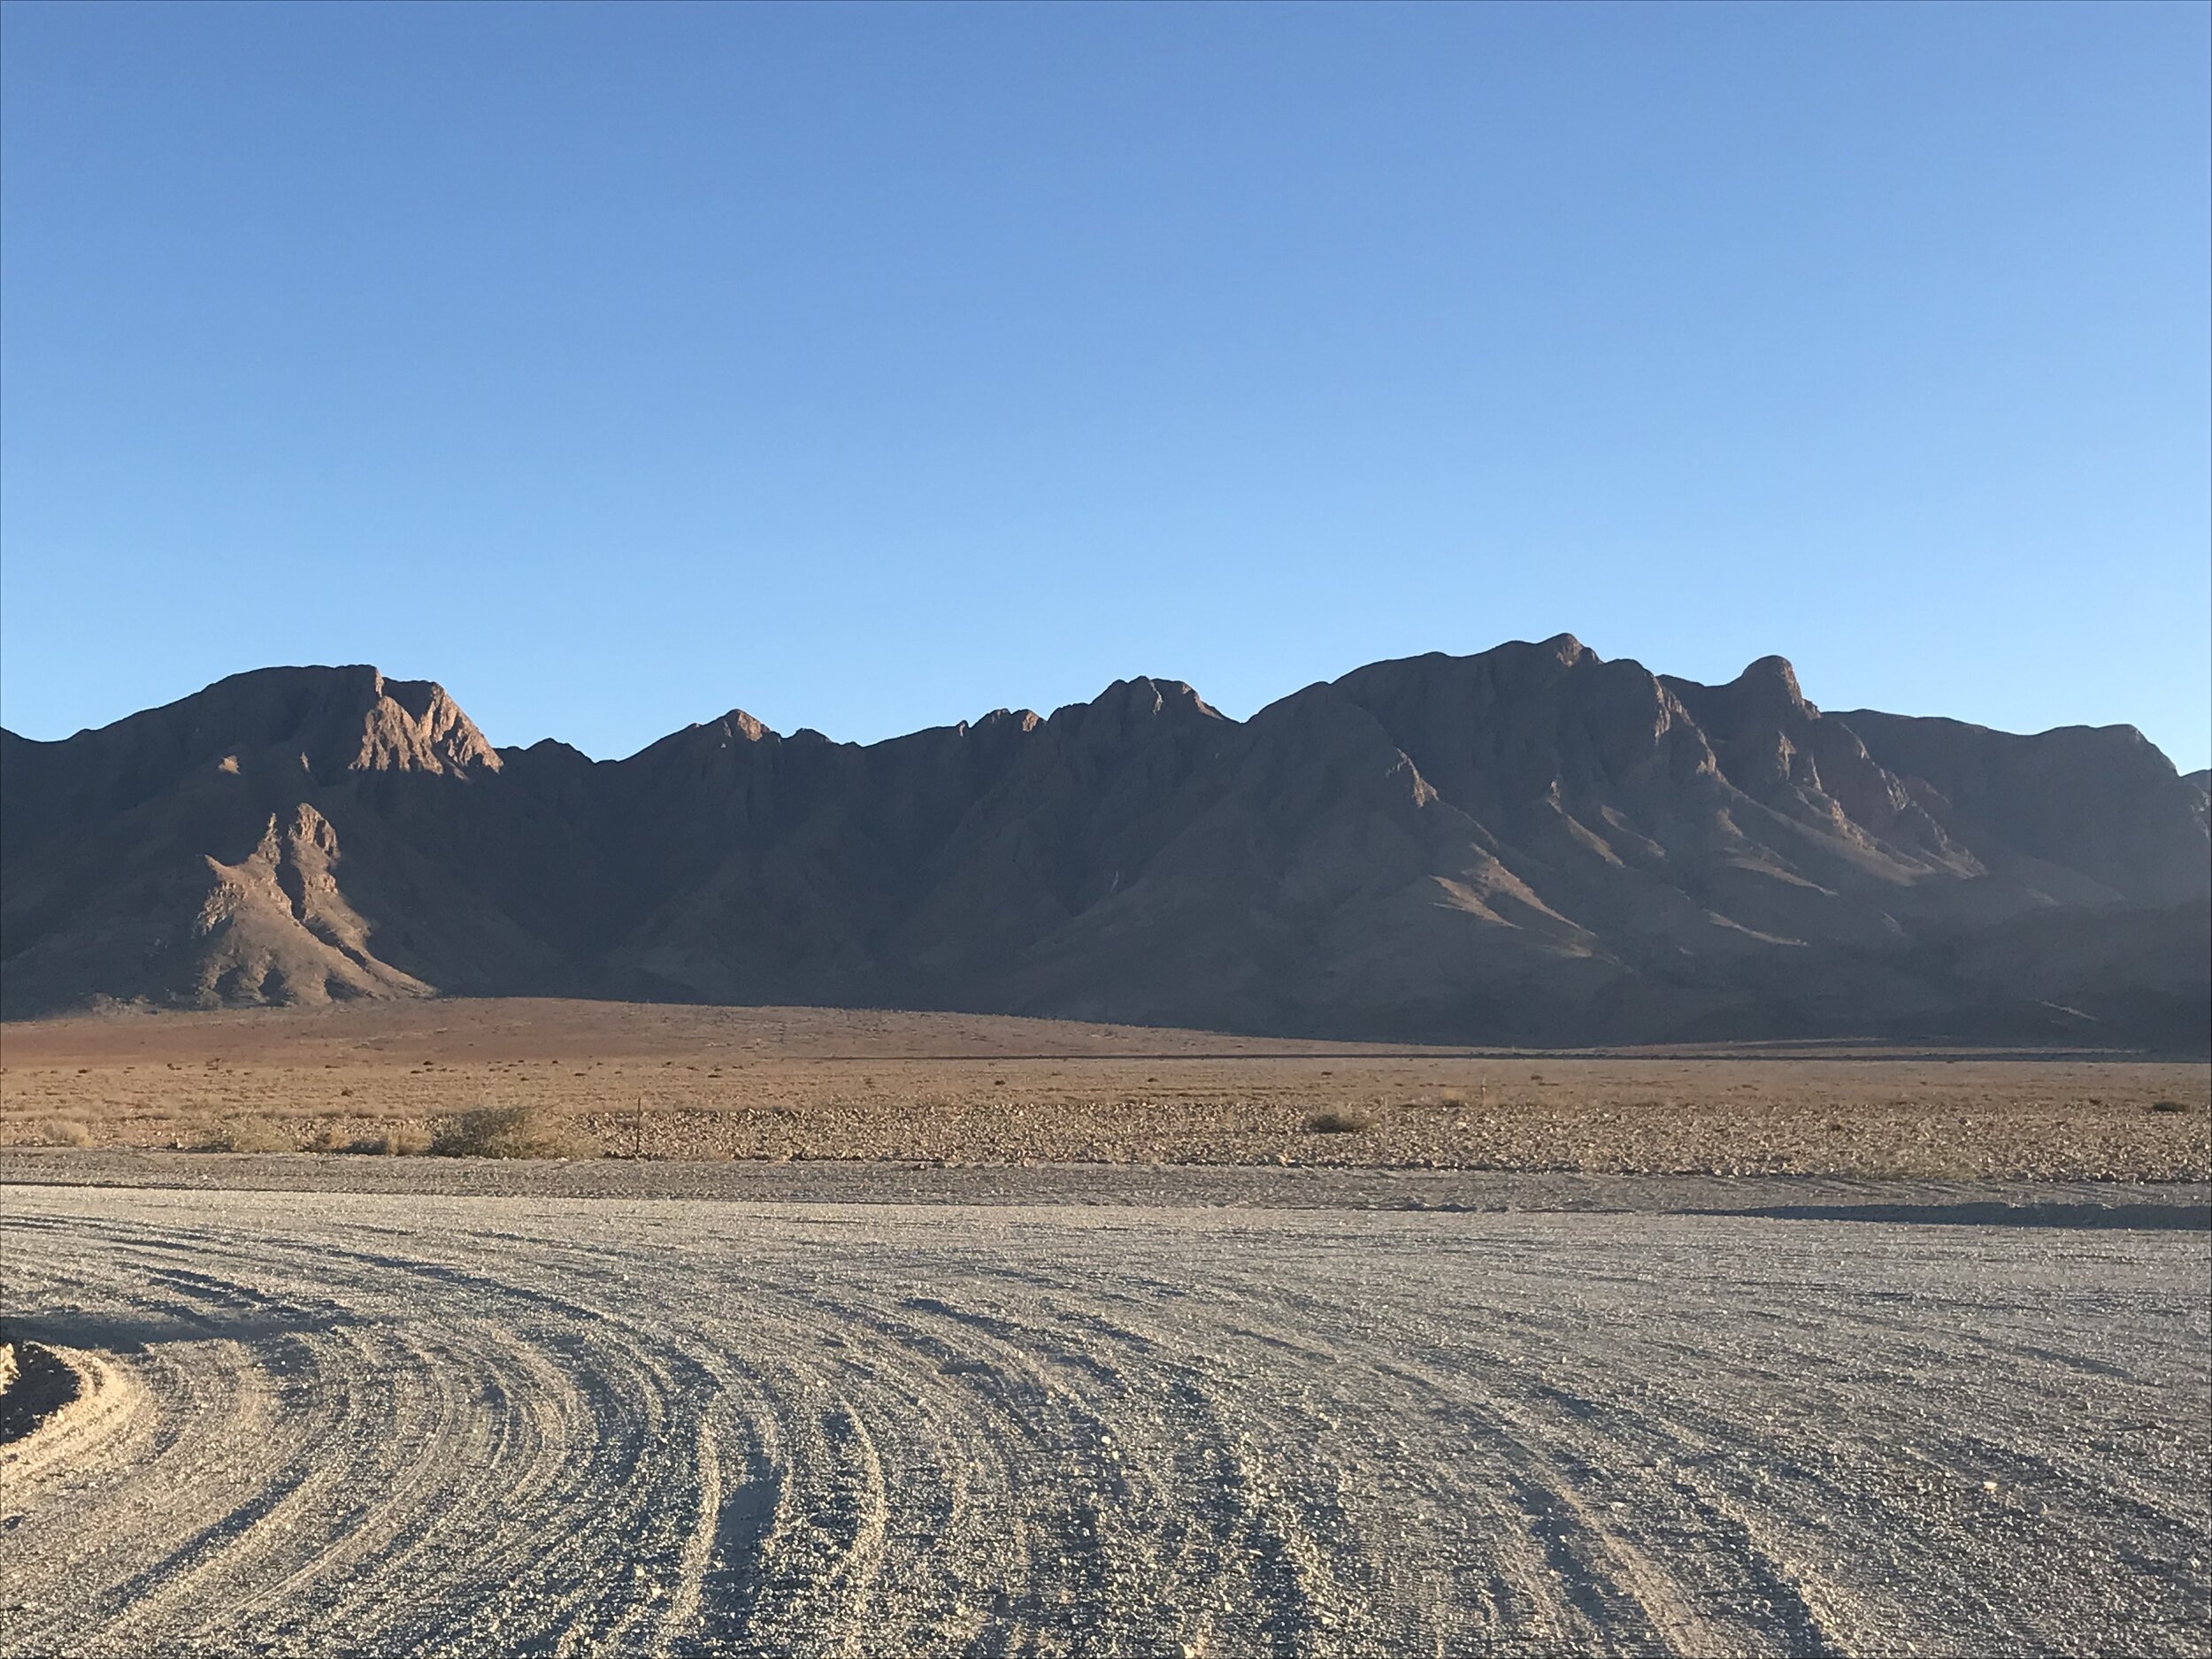 Renting a Car in Namibia – The Things I Wish I had Known